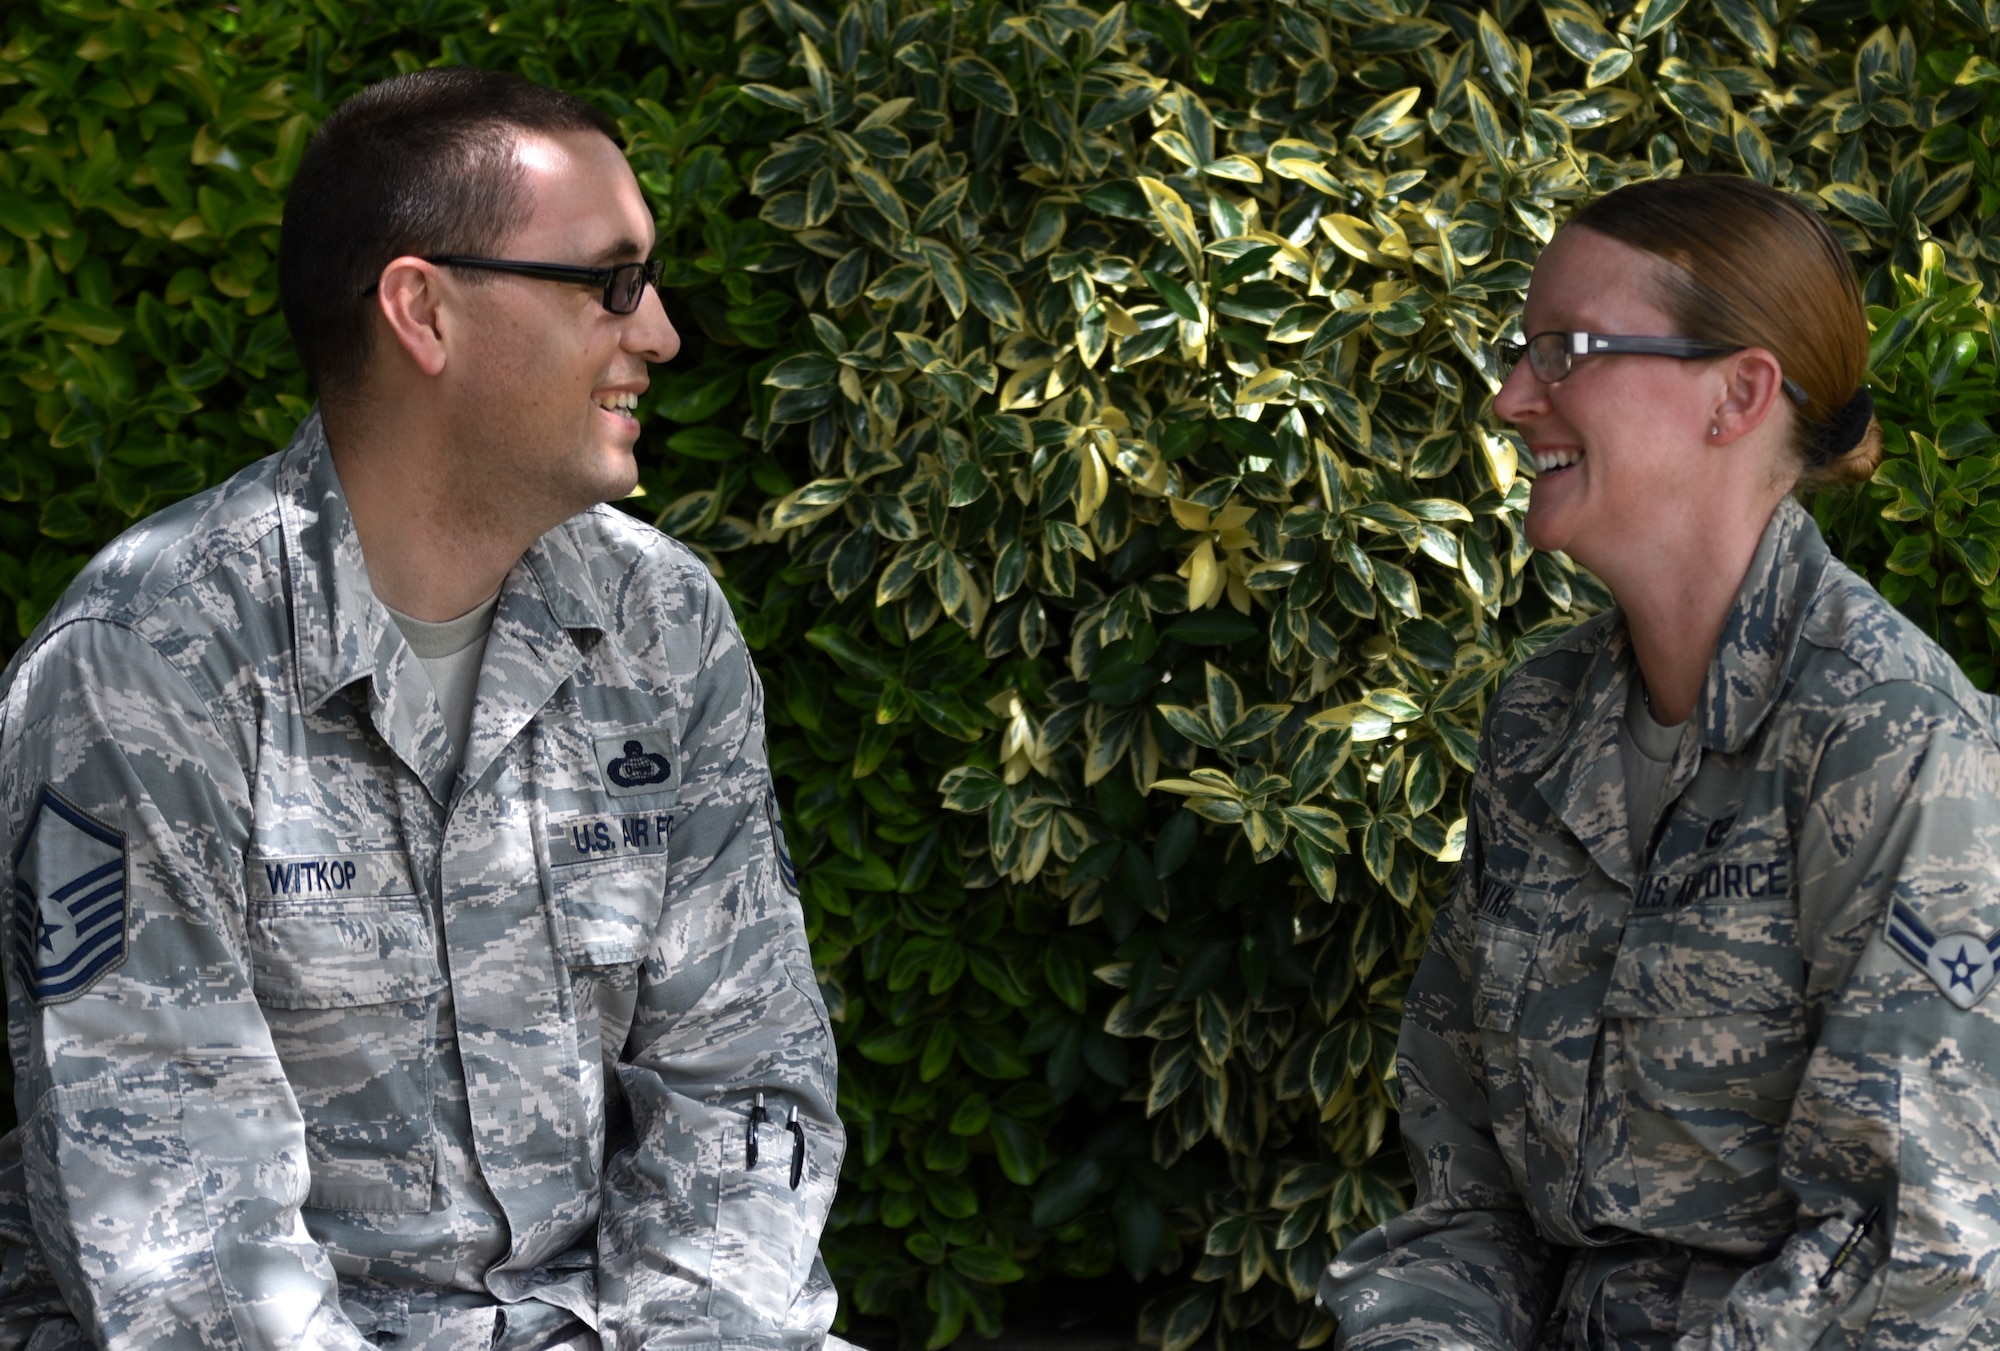 U.S. Air Force Master Sgt. Stuart Witkop, left, 34th Intelligence Squadron supervisor, and Airman1st Class Mary Witkop, 70th Operations Support Squadron technician, pose for a photo at Fort George G. Meade, Maryland, June 19, 2019,. Mary was a Key Spouse for the 34th IS for four years before enlisting in September 2018. (U.S. Air Force photo by Senior Airman Gerald R. Willis)